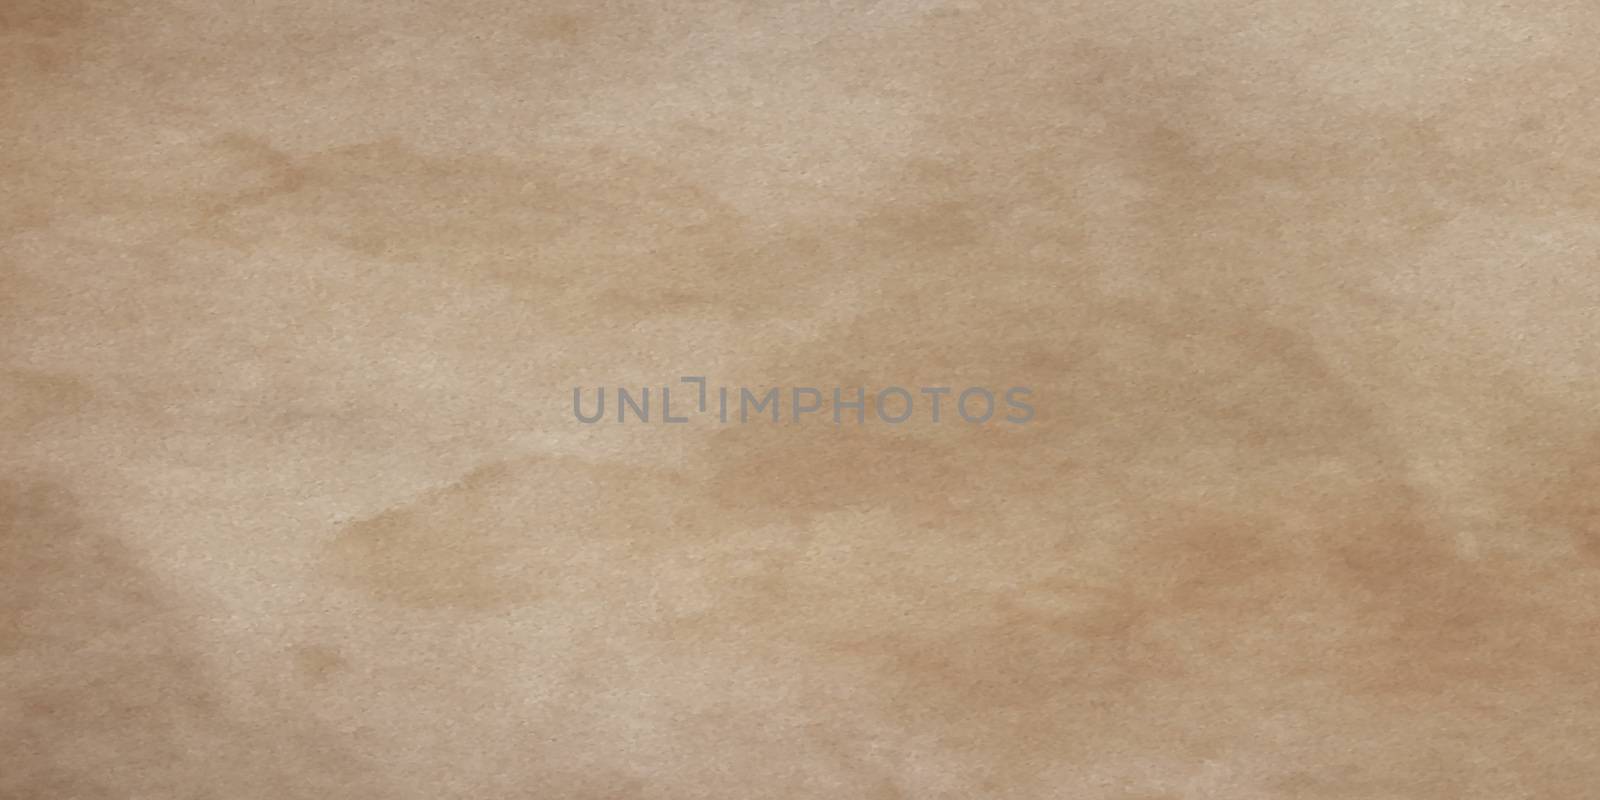 Neutral base effect canvas for artistic bases, for banner, cream cologne by silviagaudenzi